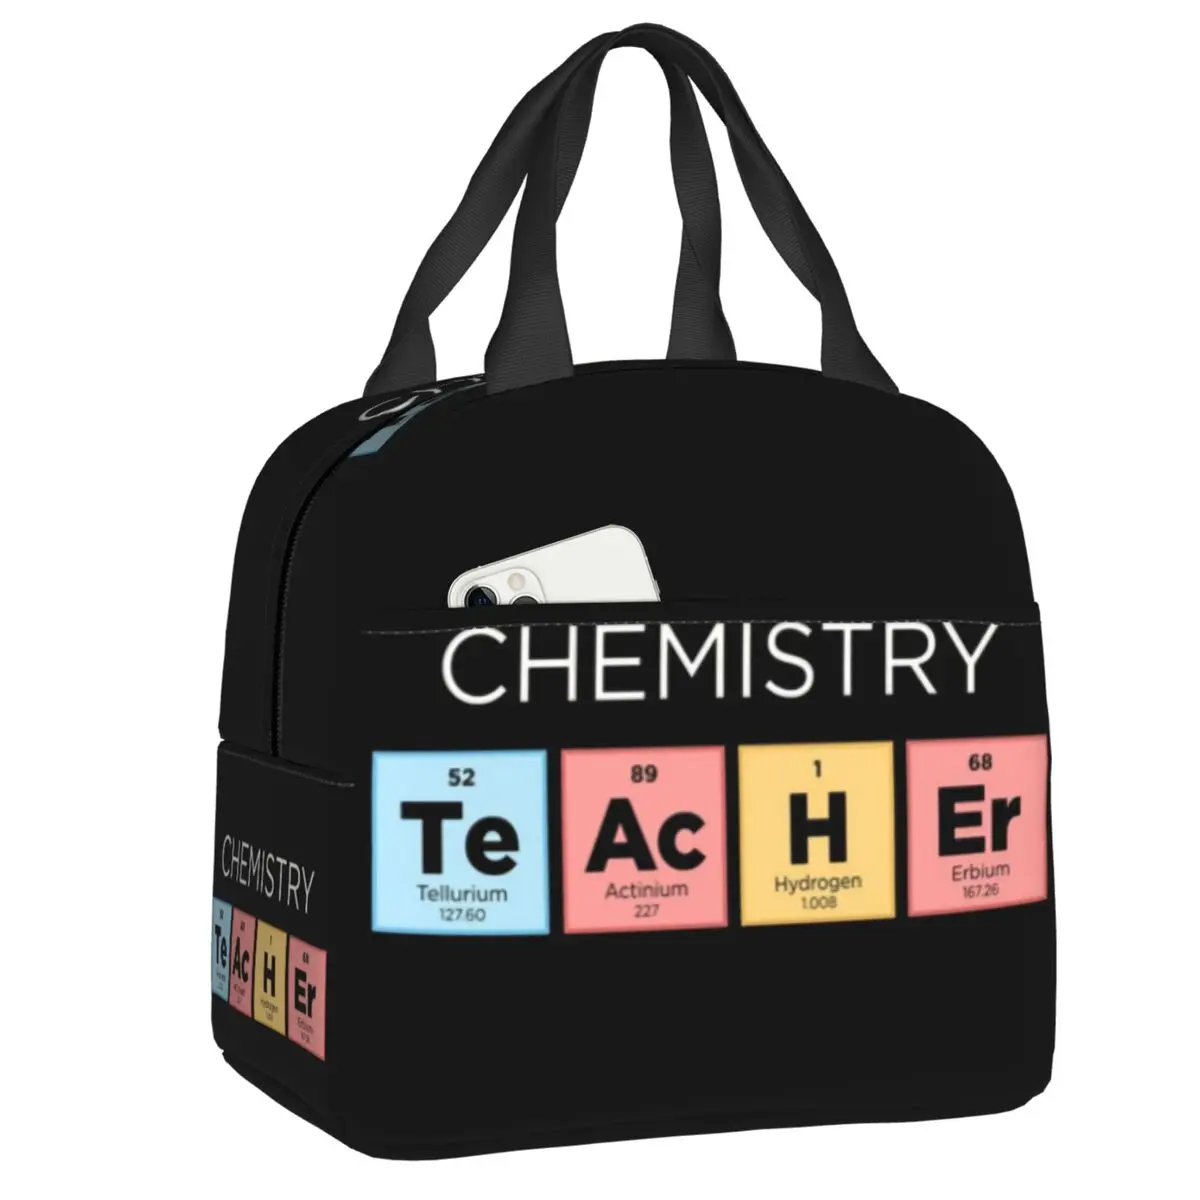 

Chemistry Teacher Periodic Table Insulated Lunch Tote Bag for Kid Science Lab Tech Portable Thermal Cooler Food Lunch Box School